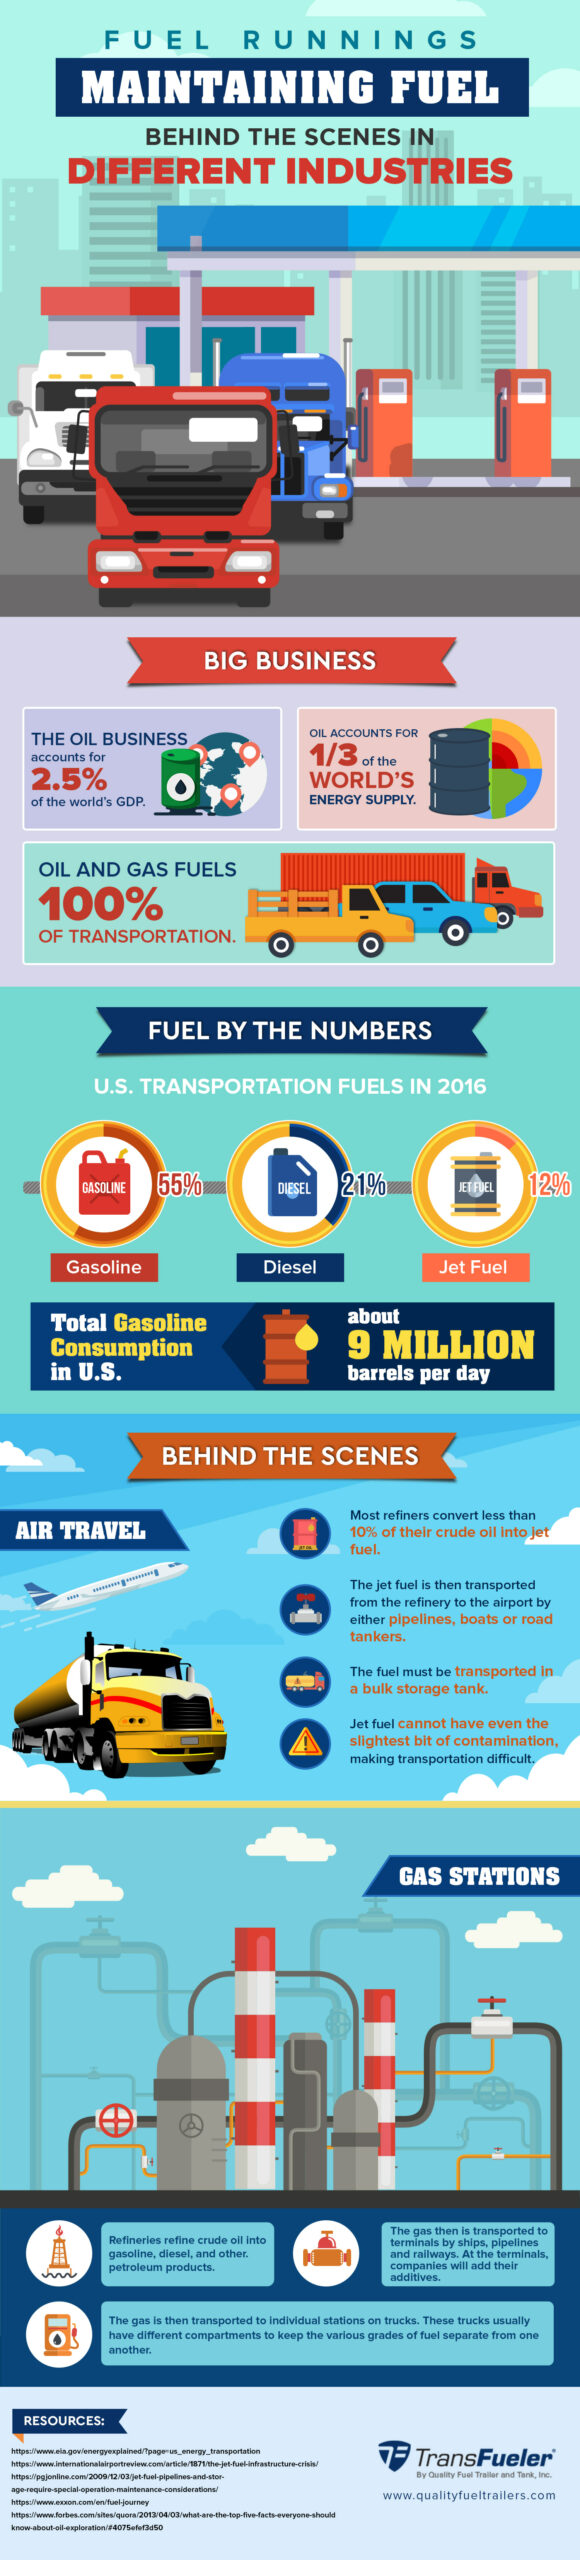 Maintaining Fuel: Behind the Scenes in Different Industries